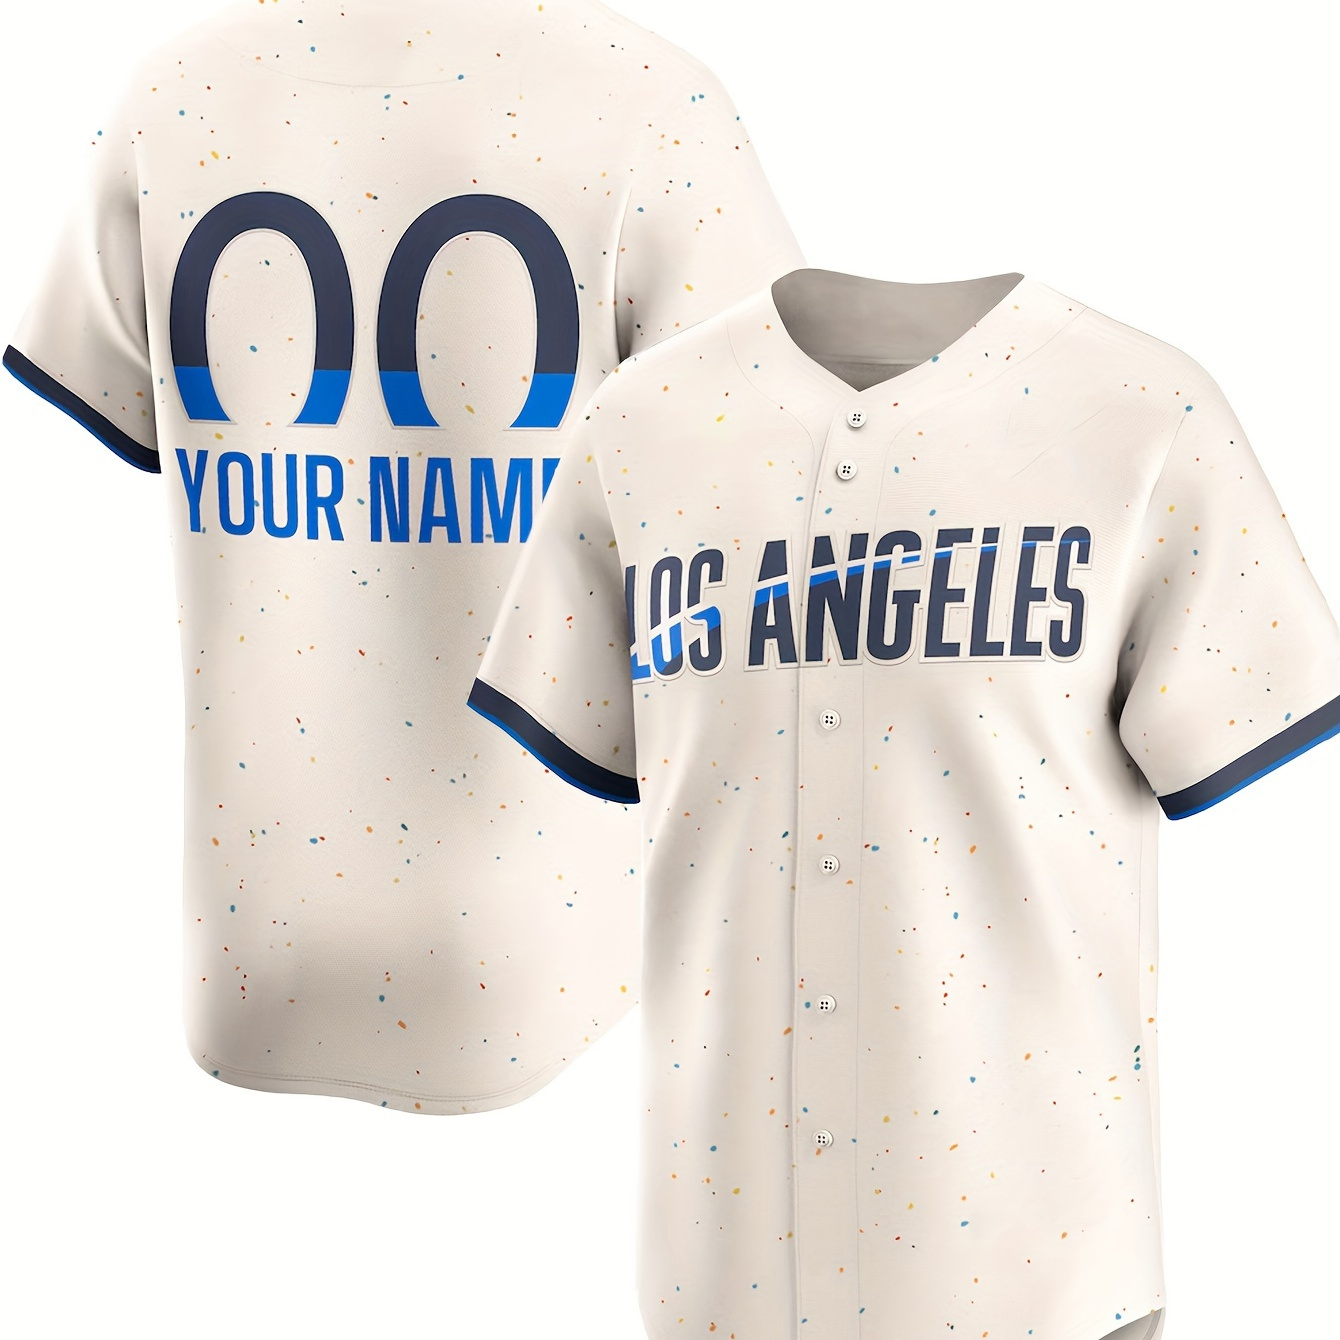 

Men's Customized Baseball Jersey, Embroider Your Personalized Name & Number, Comfy Top For Summer Sport